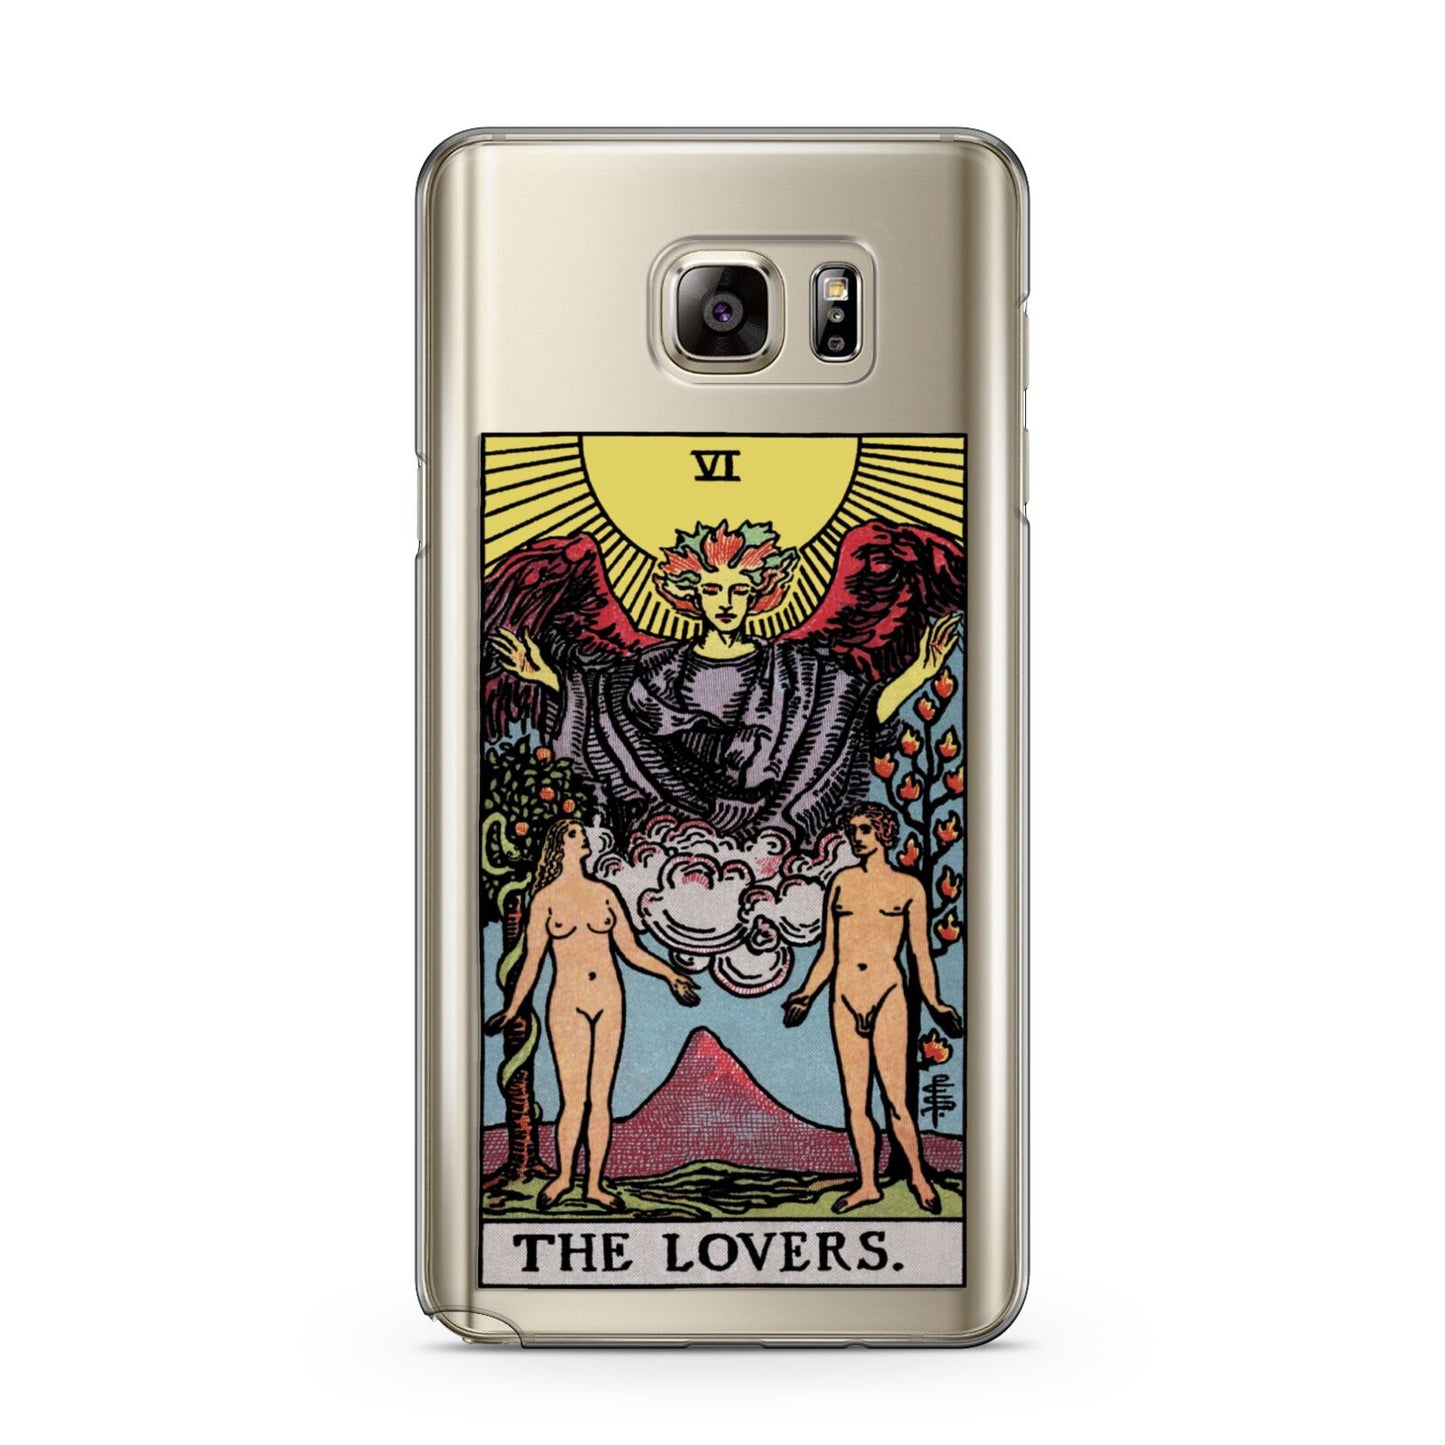 The Lovers Tarot Card Samsung Galaxy Note 5 Case